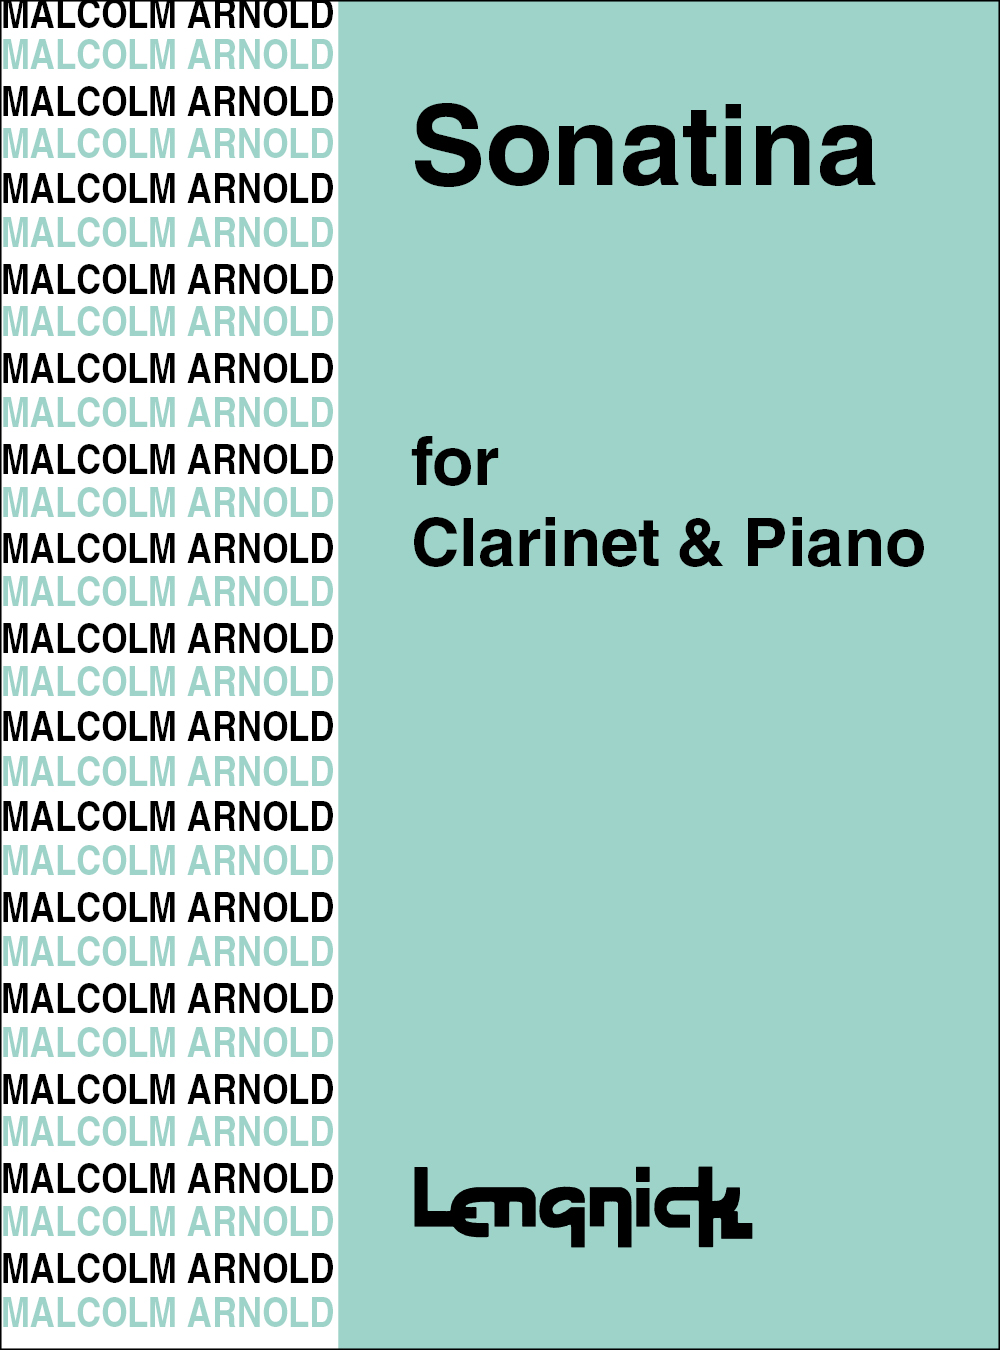 Malcolm Arnold: Sonatina for Clarinet and Piano Opus 29: Clarinet: Instrumental